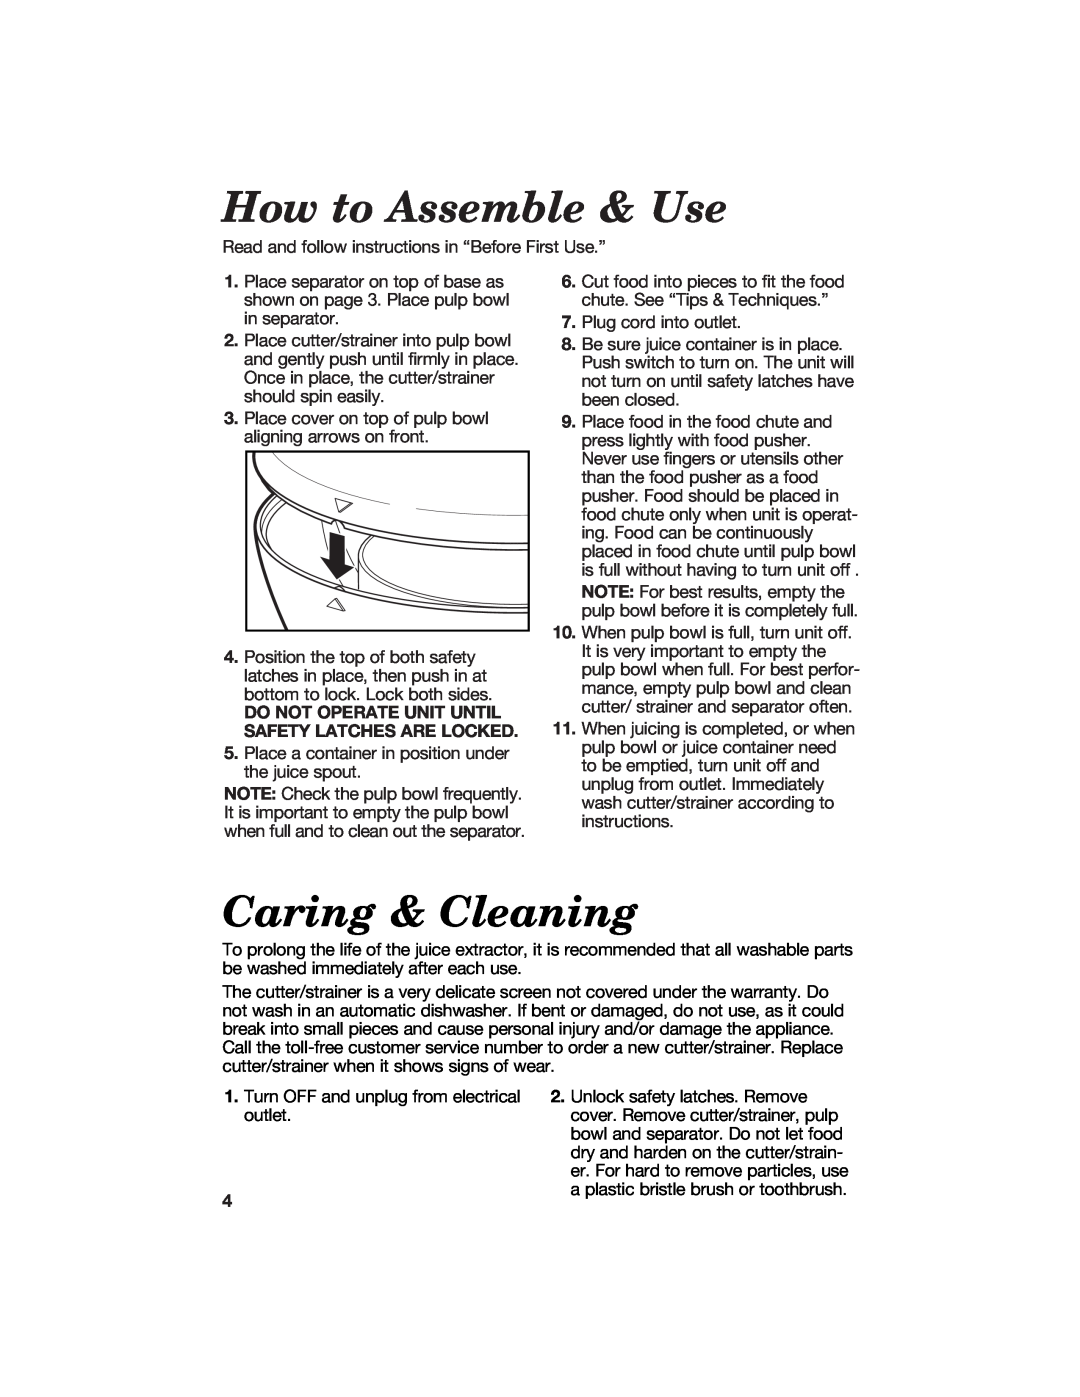 Hamilton Beach 67333 manual How to Assemble & Use, Caring & Cleaning 